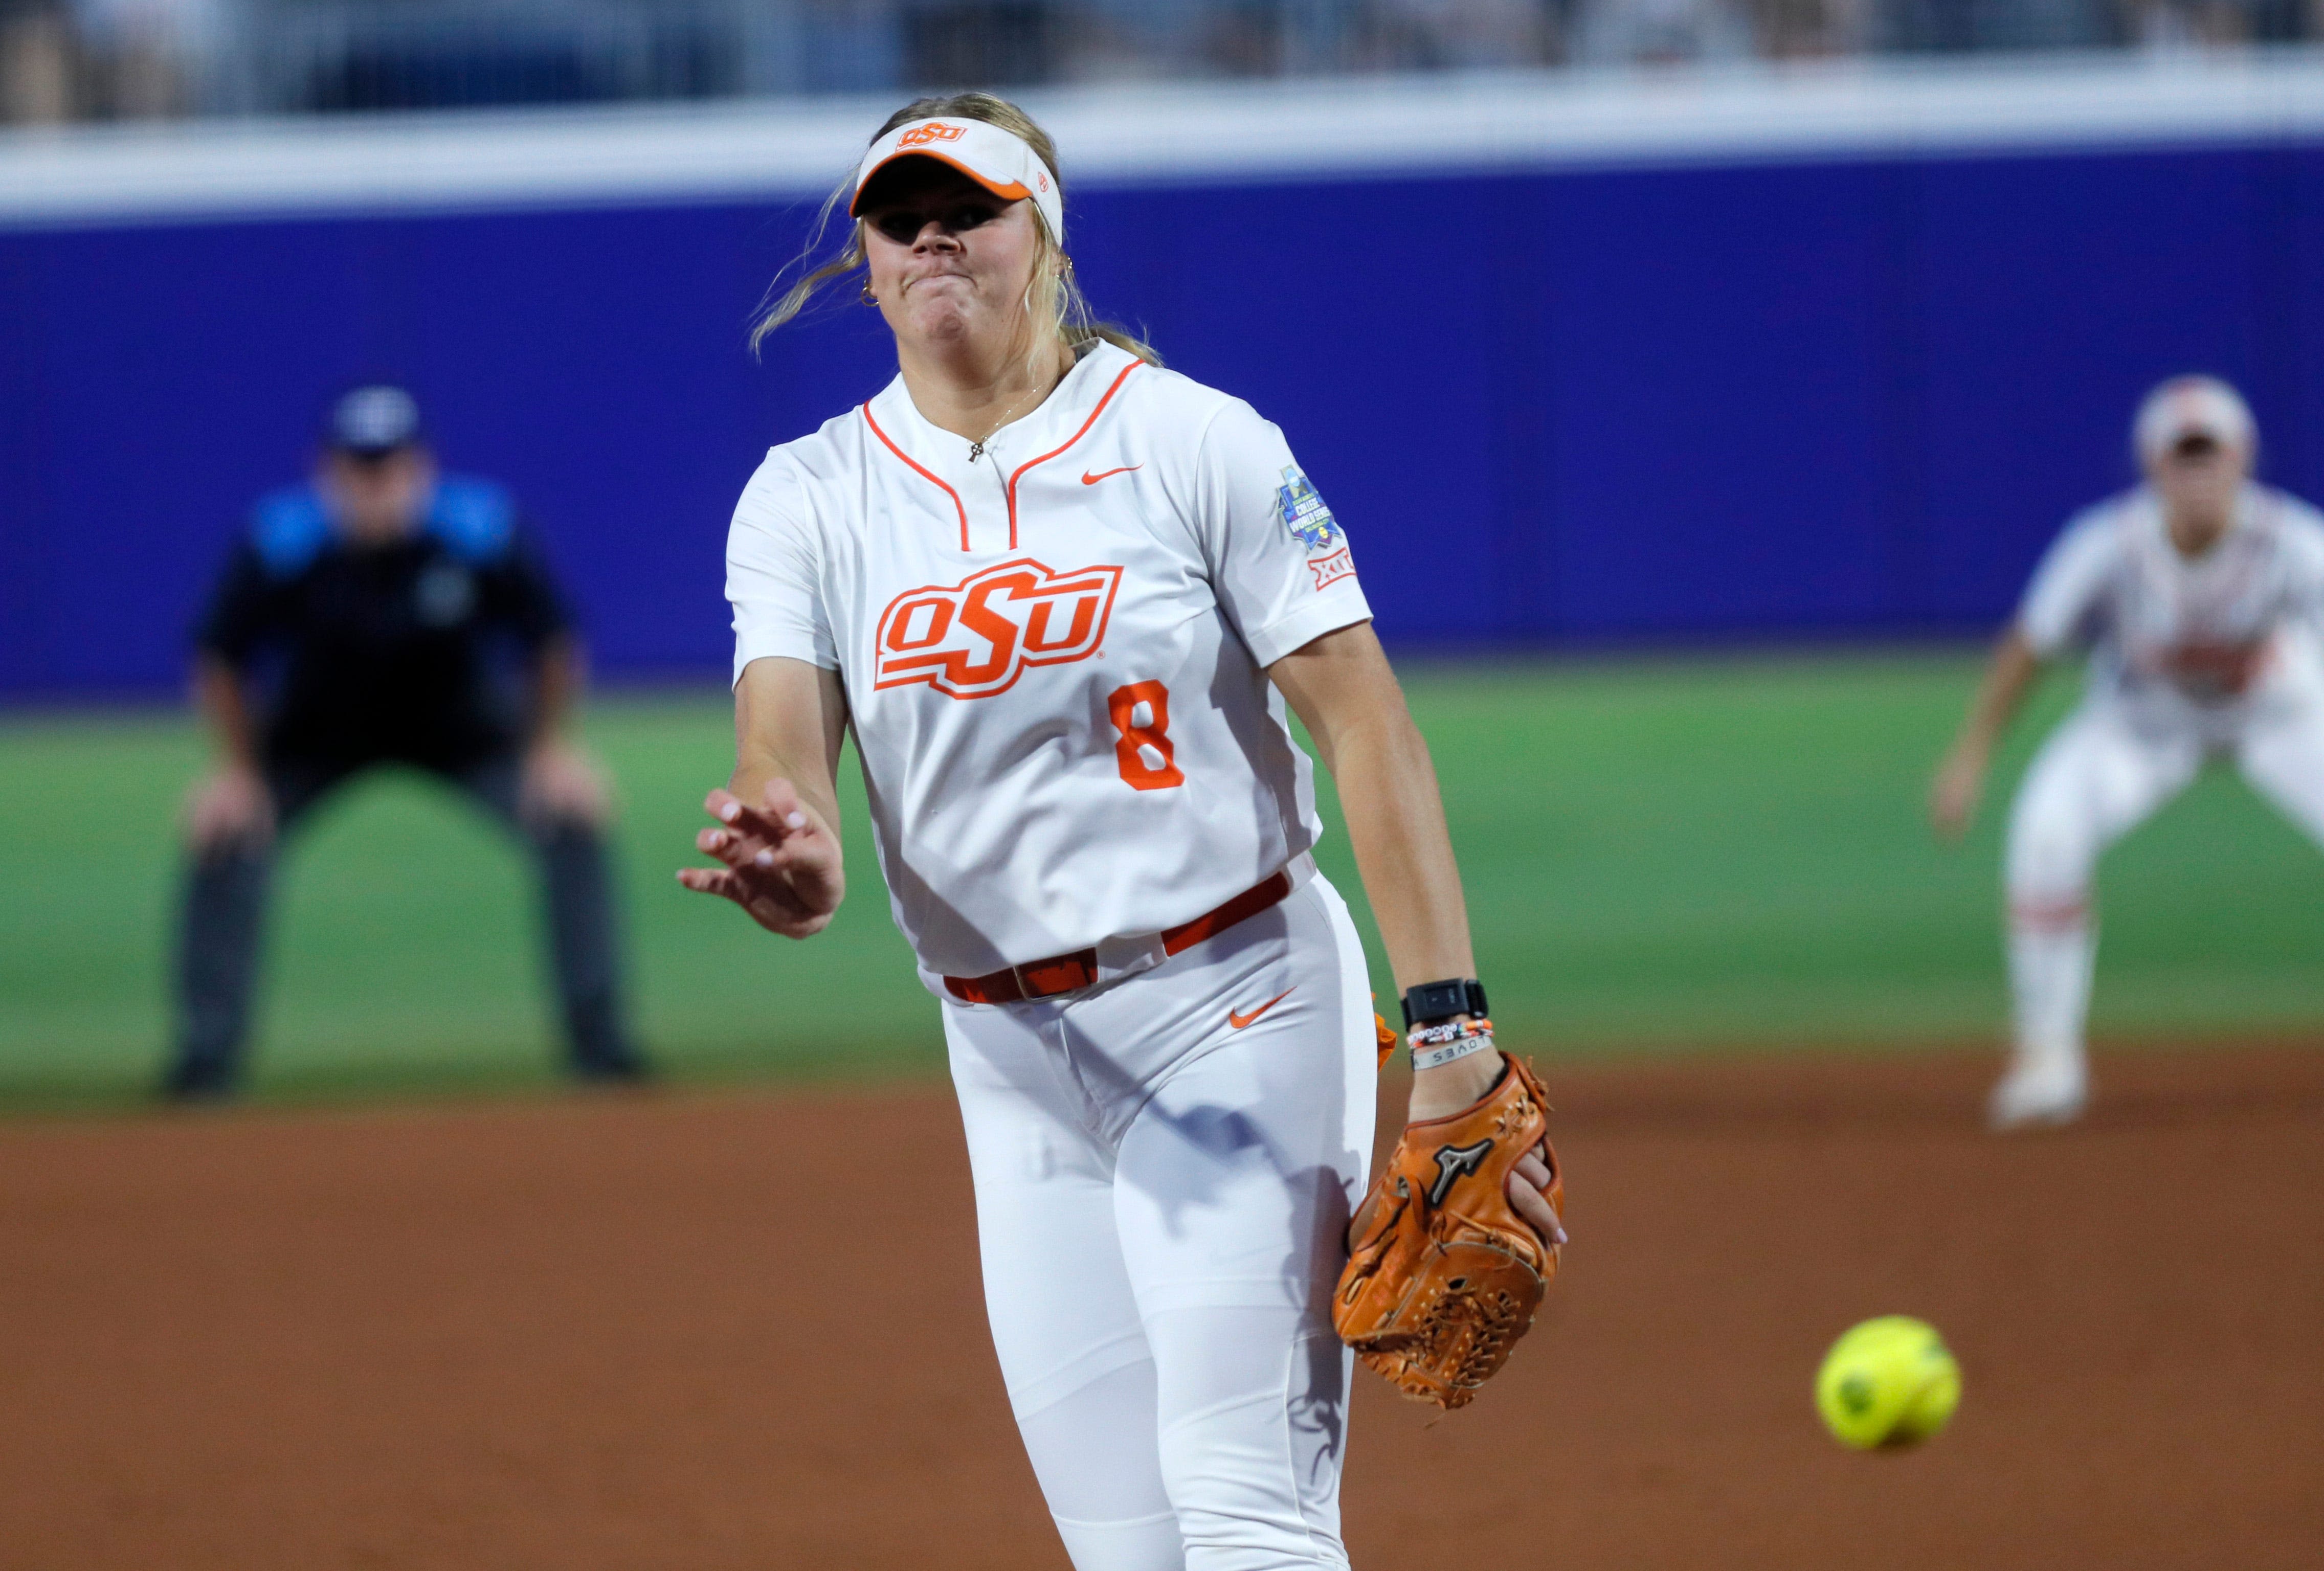 Oklahoma State softball vs Stanford takeaways: Cowgirls ousted from WCWS in blowout loss